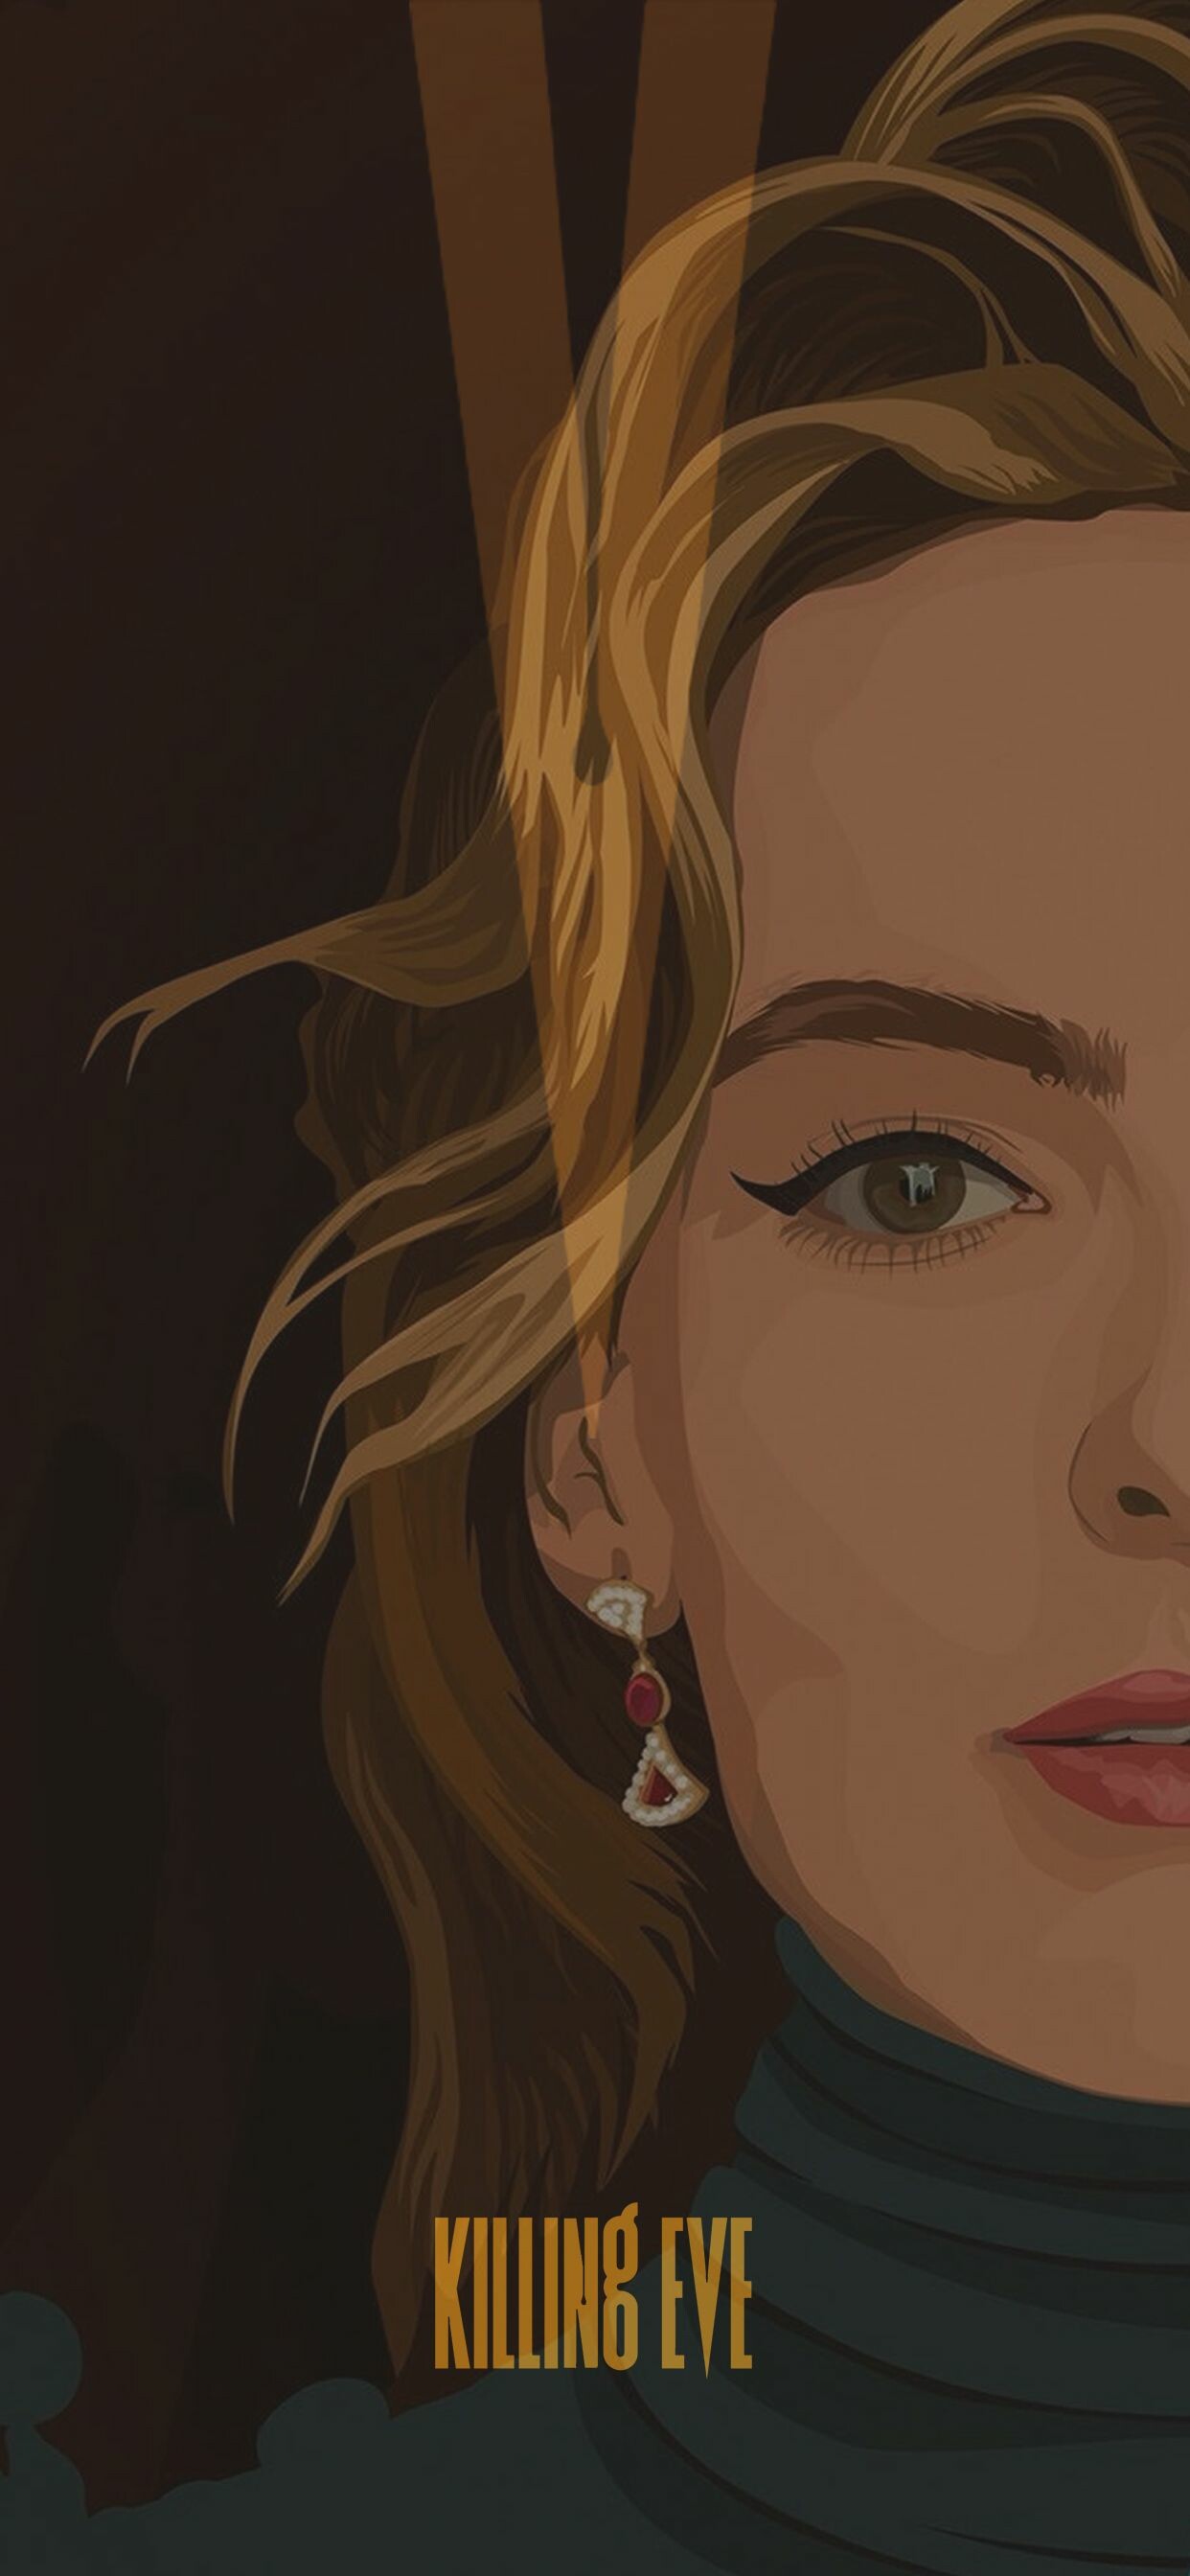 Killing Eve: The series follows an investigator tasked with capturing psychopathic assassin Villanelle. 1250x2690 HD Background.